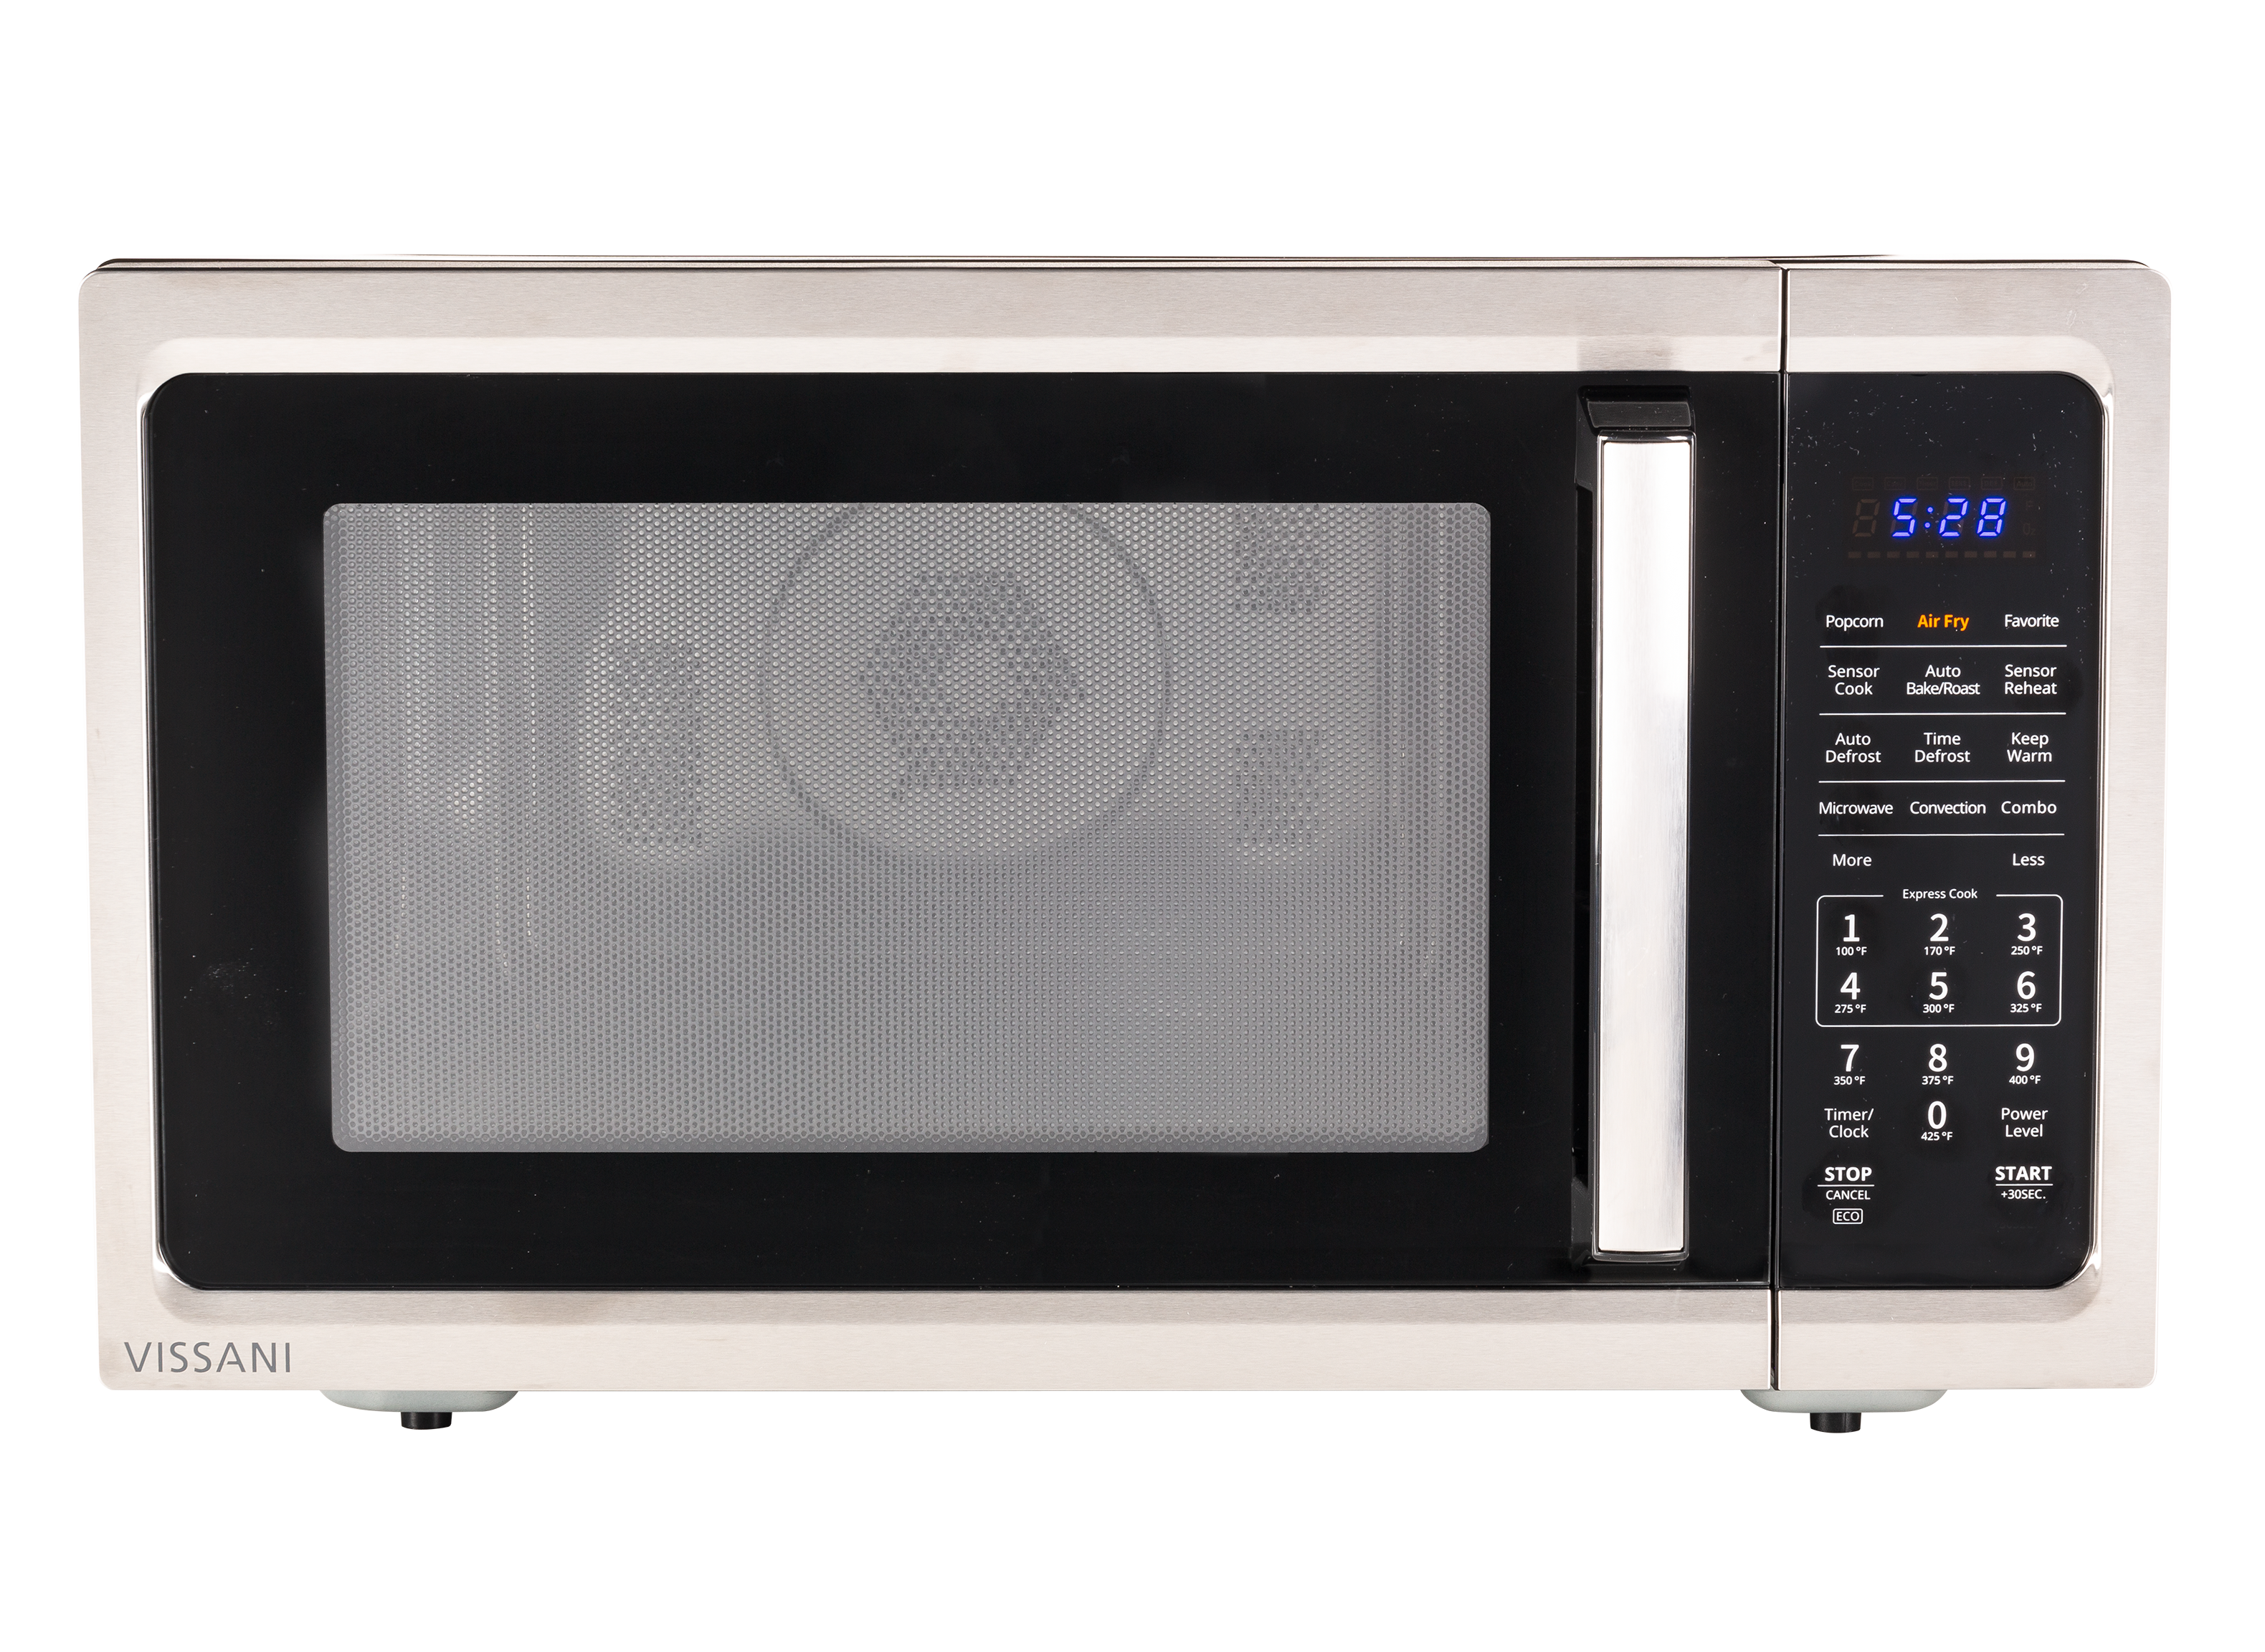 https://crdms.images.consumerreports.org/prod/products/cr/models/406565-large-countertop-microwaves-vissani-ec042a2kj-10030418.png